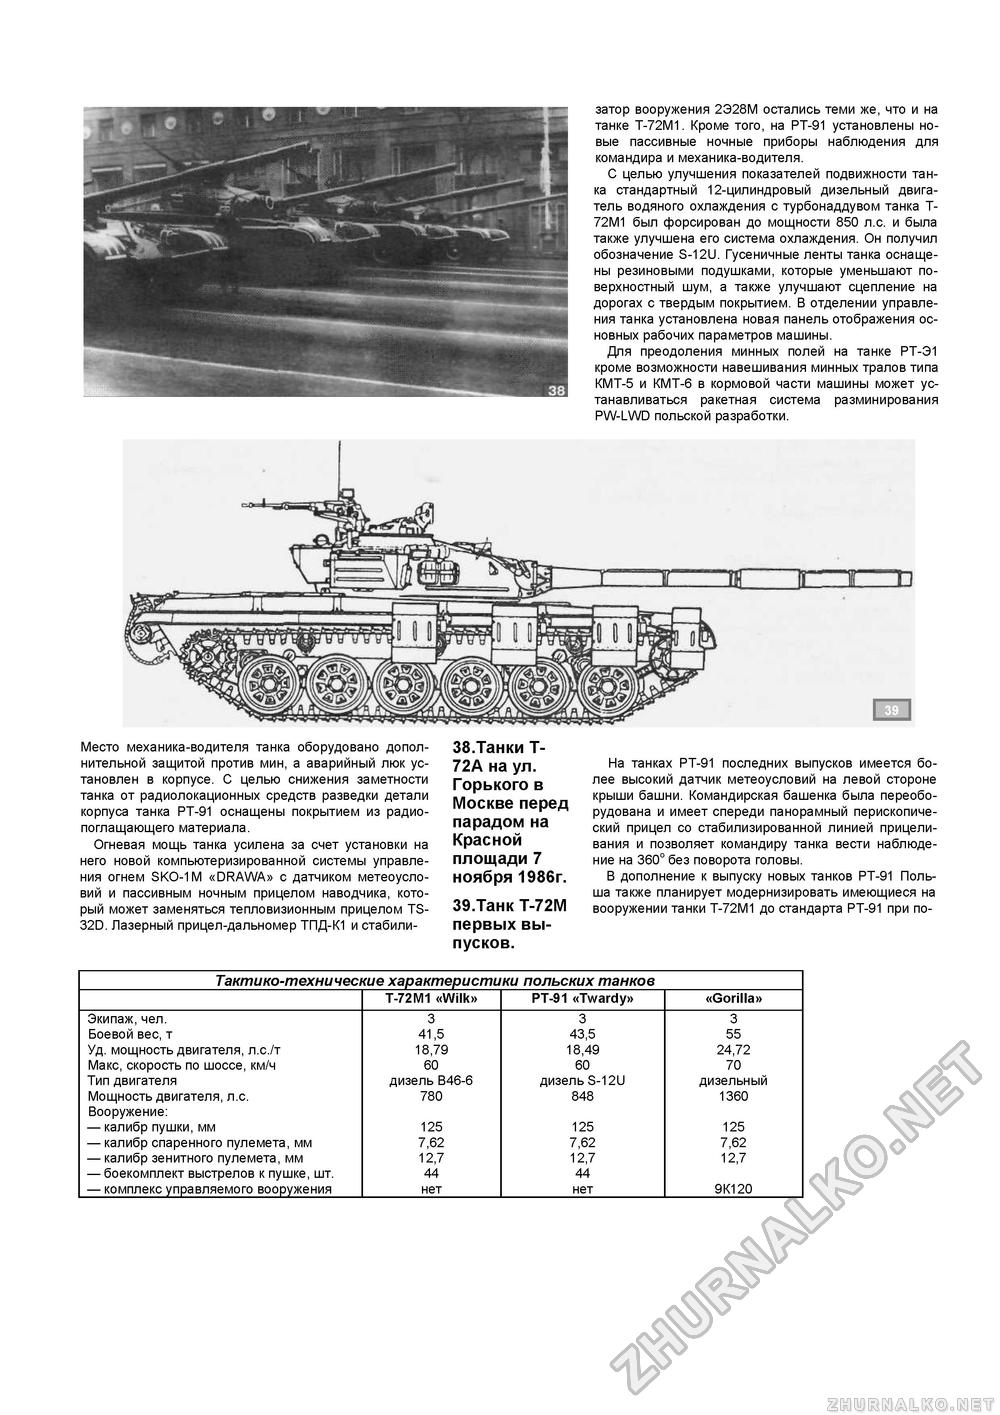  Special -  T-72,  27